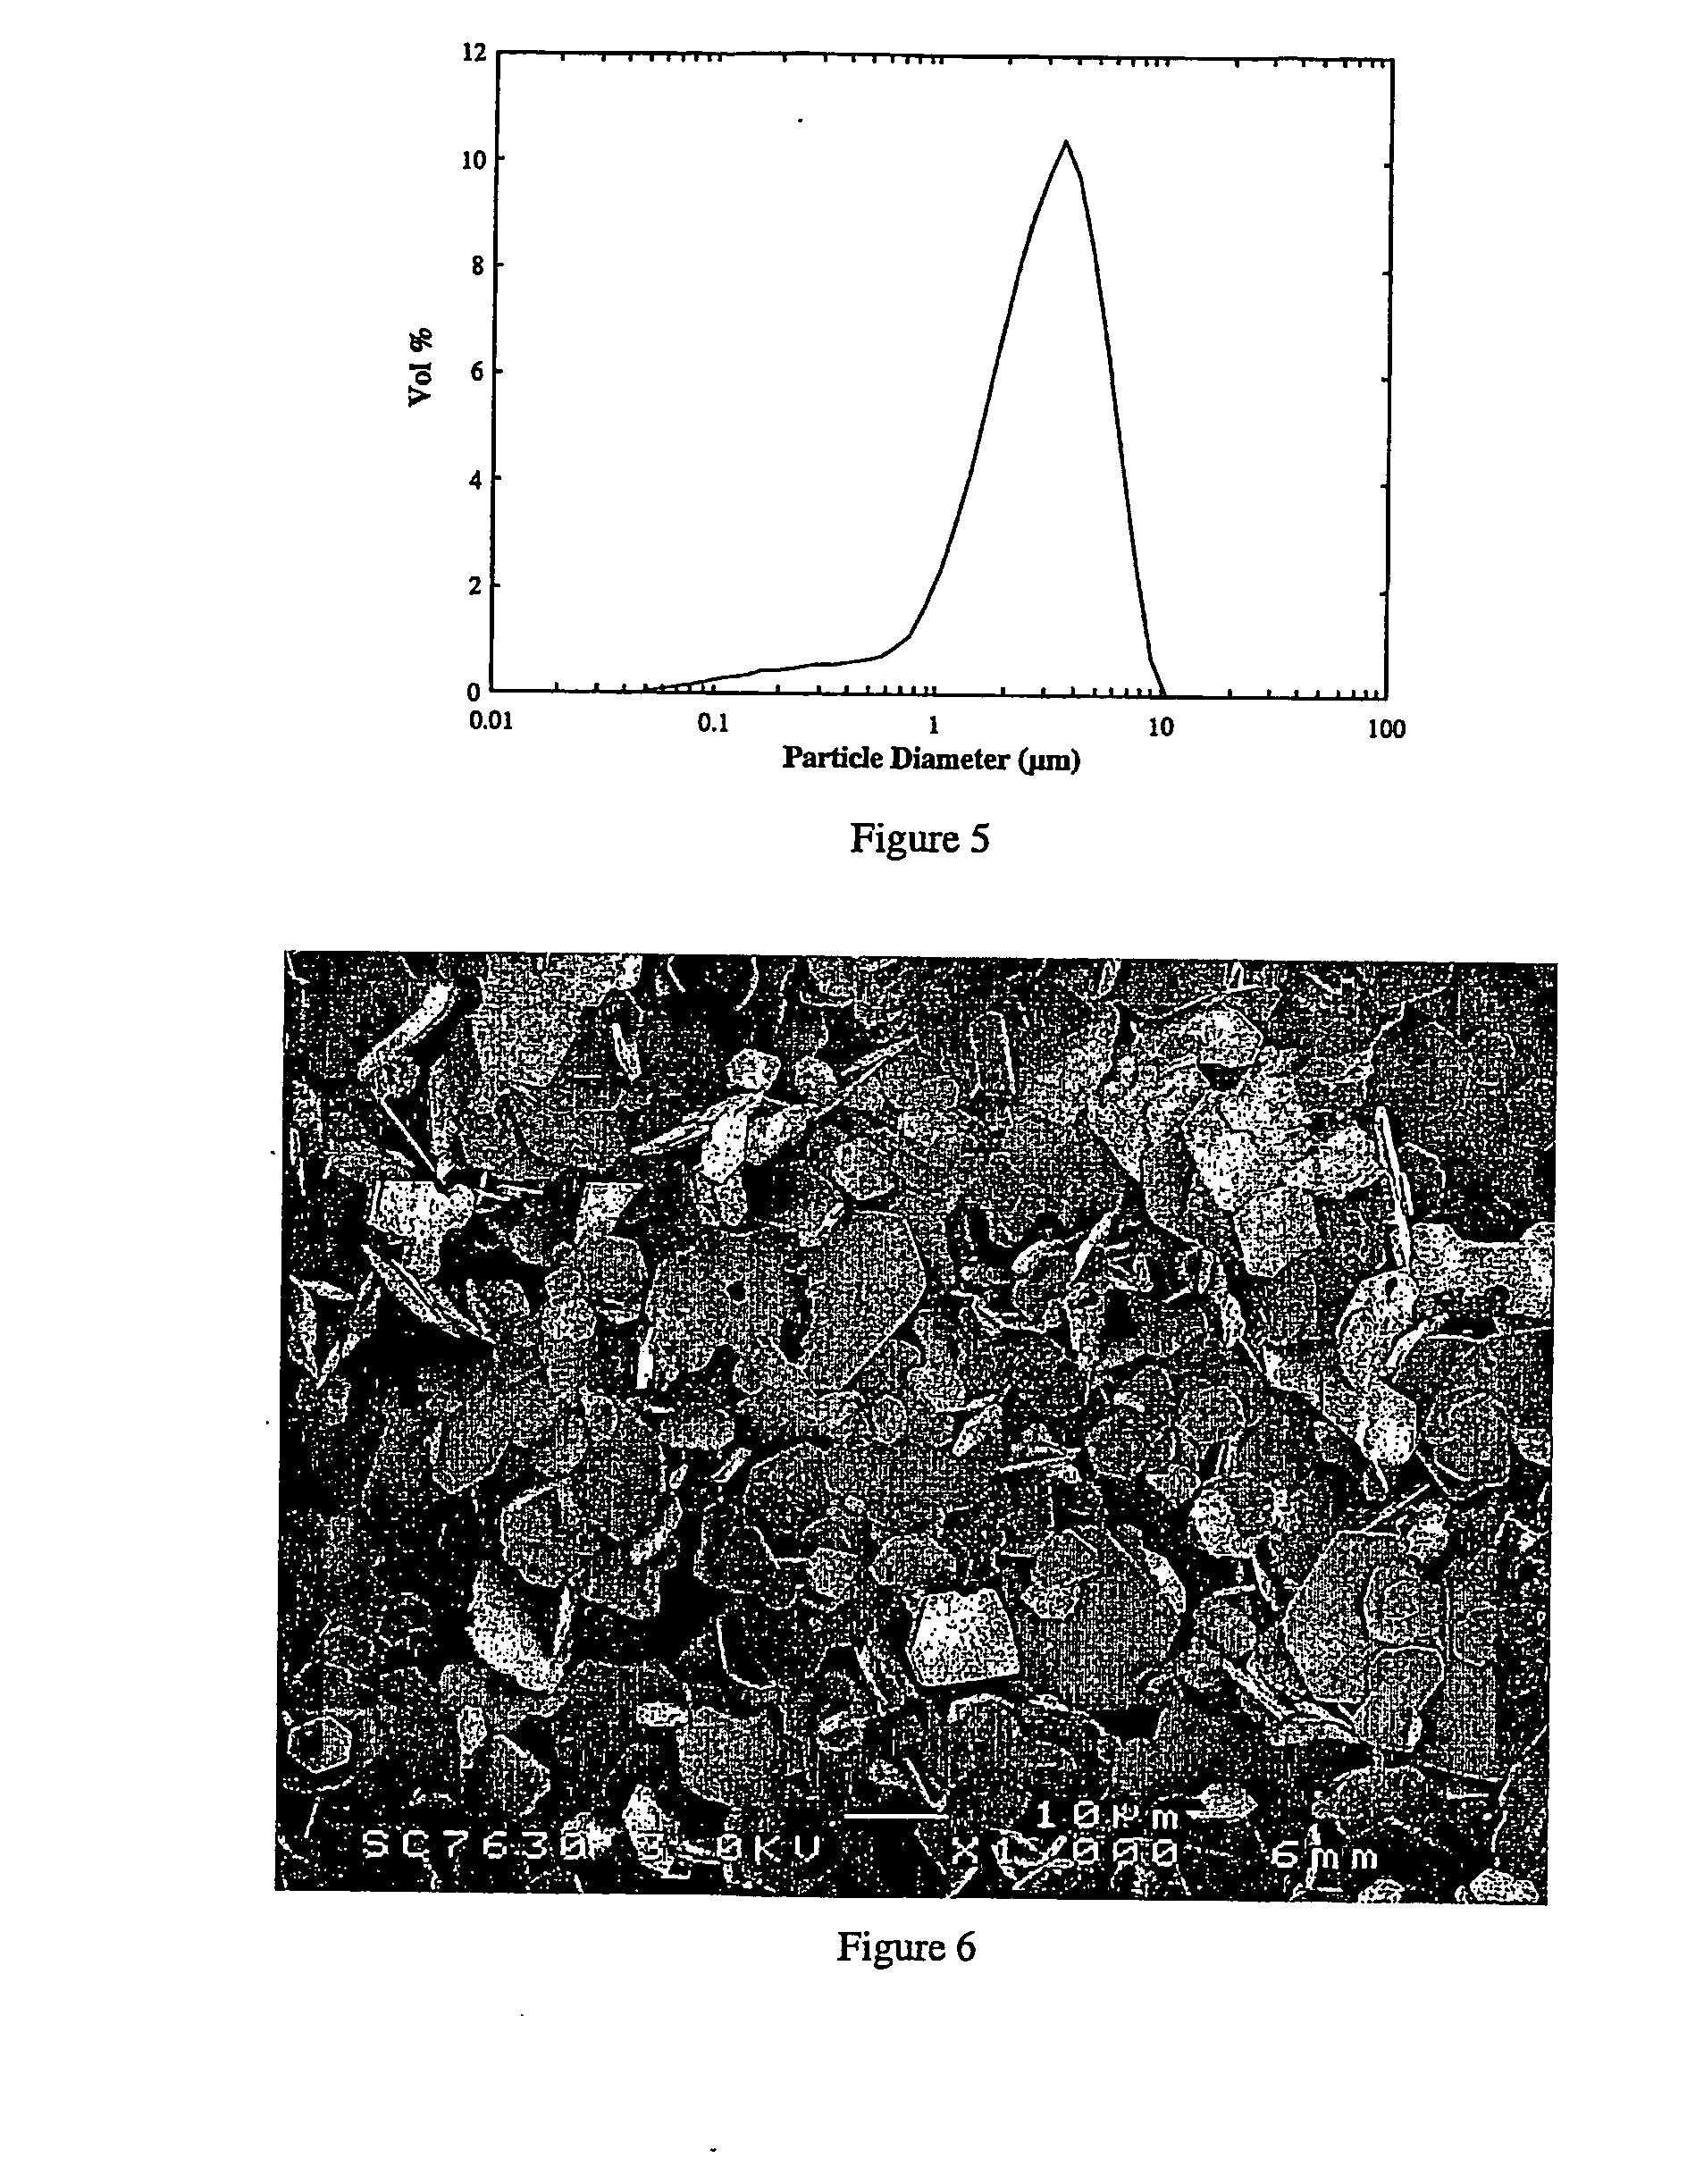 Process for the production of ultrafine plate-like alumina particles